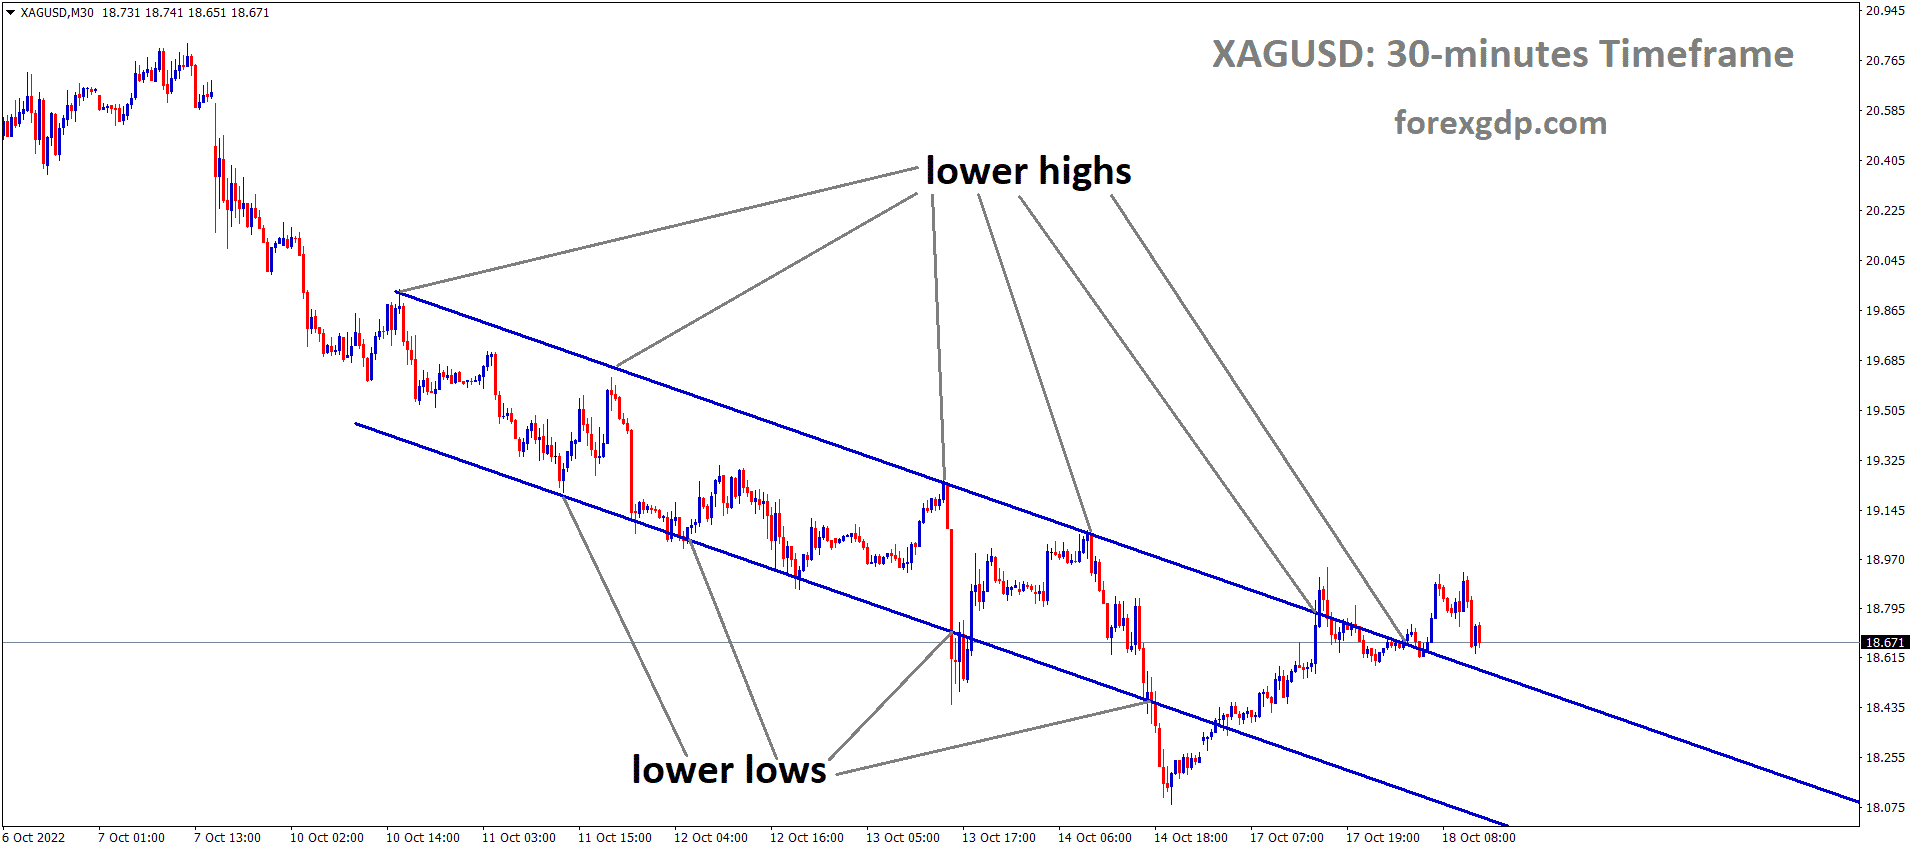 XAGUSD Silver price is moving in the Descending channel and the market has reached the lower high area of the channel 1